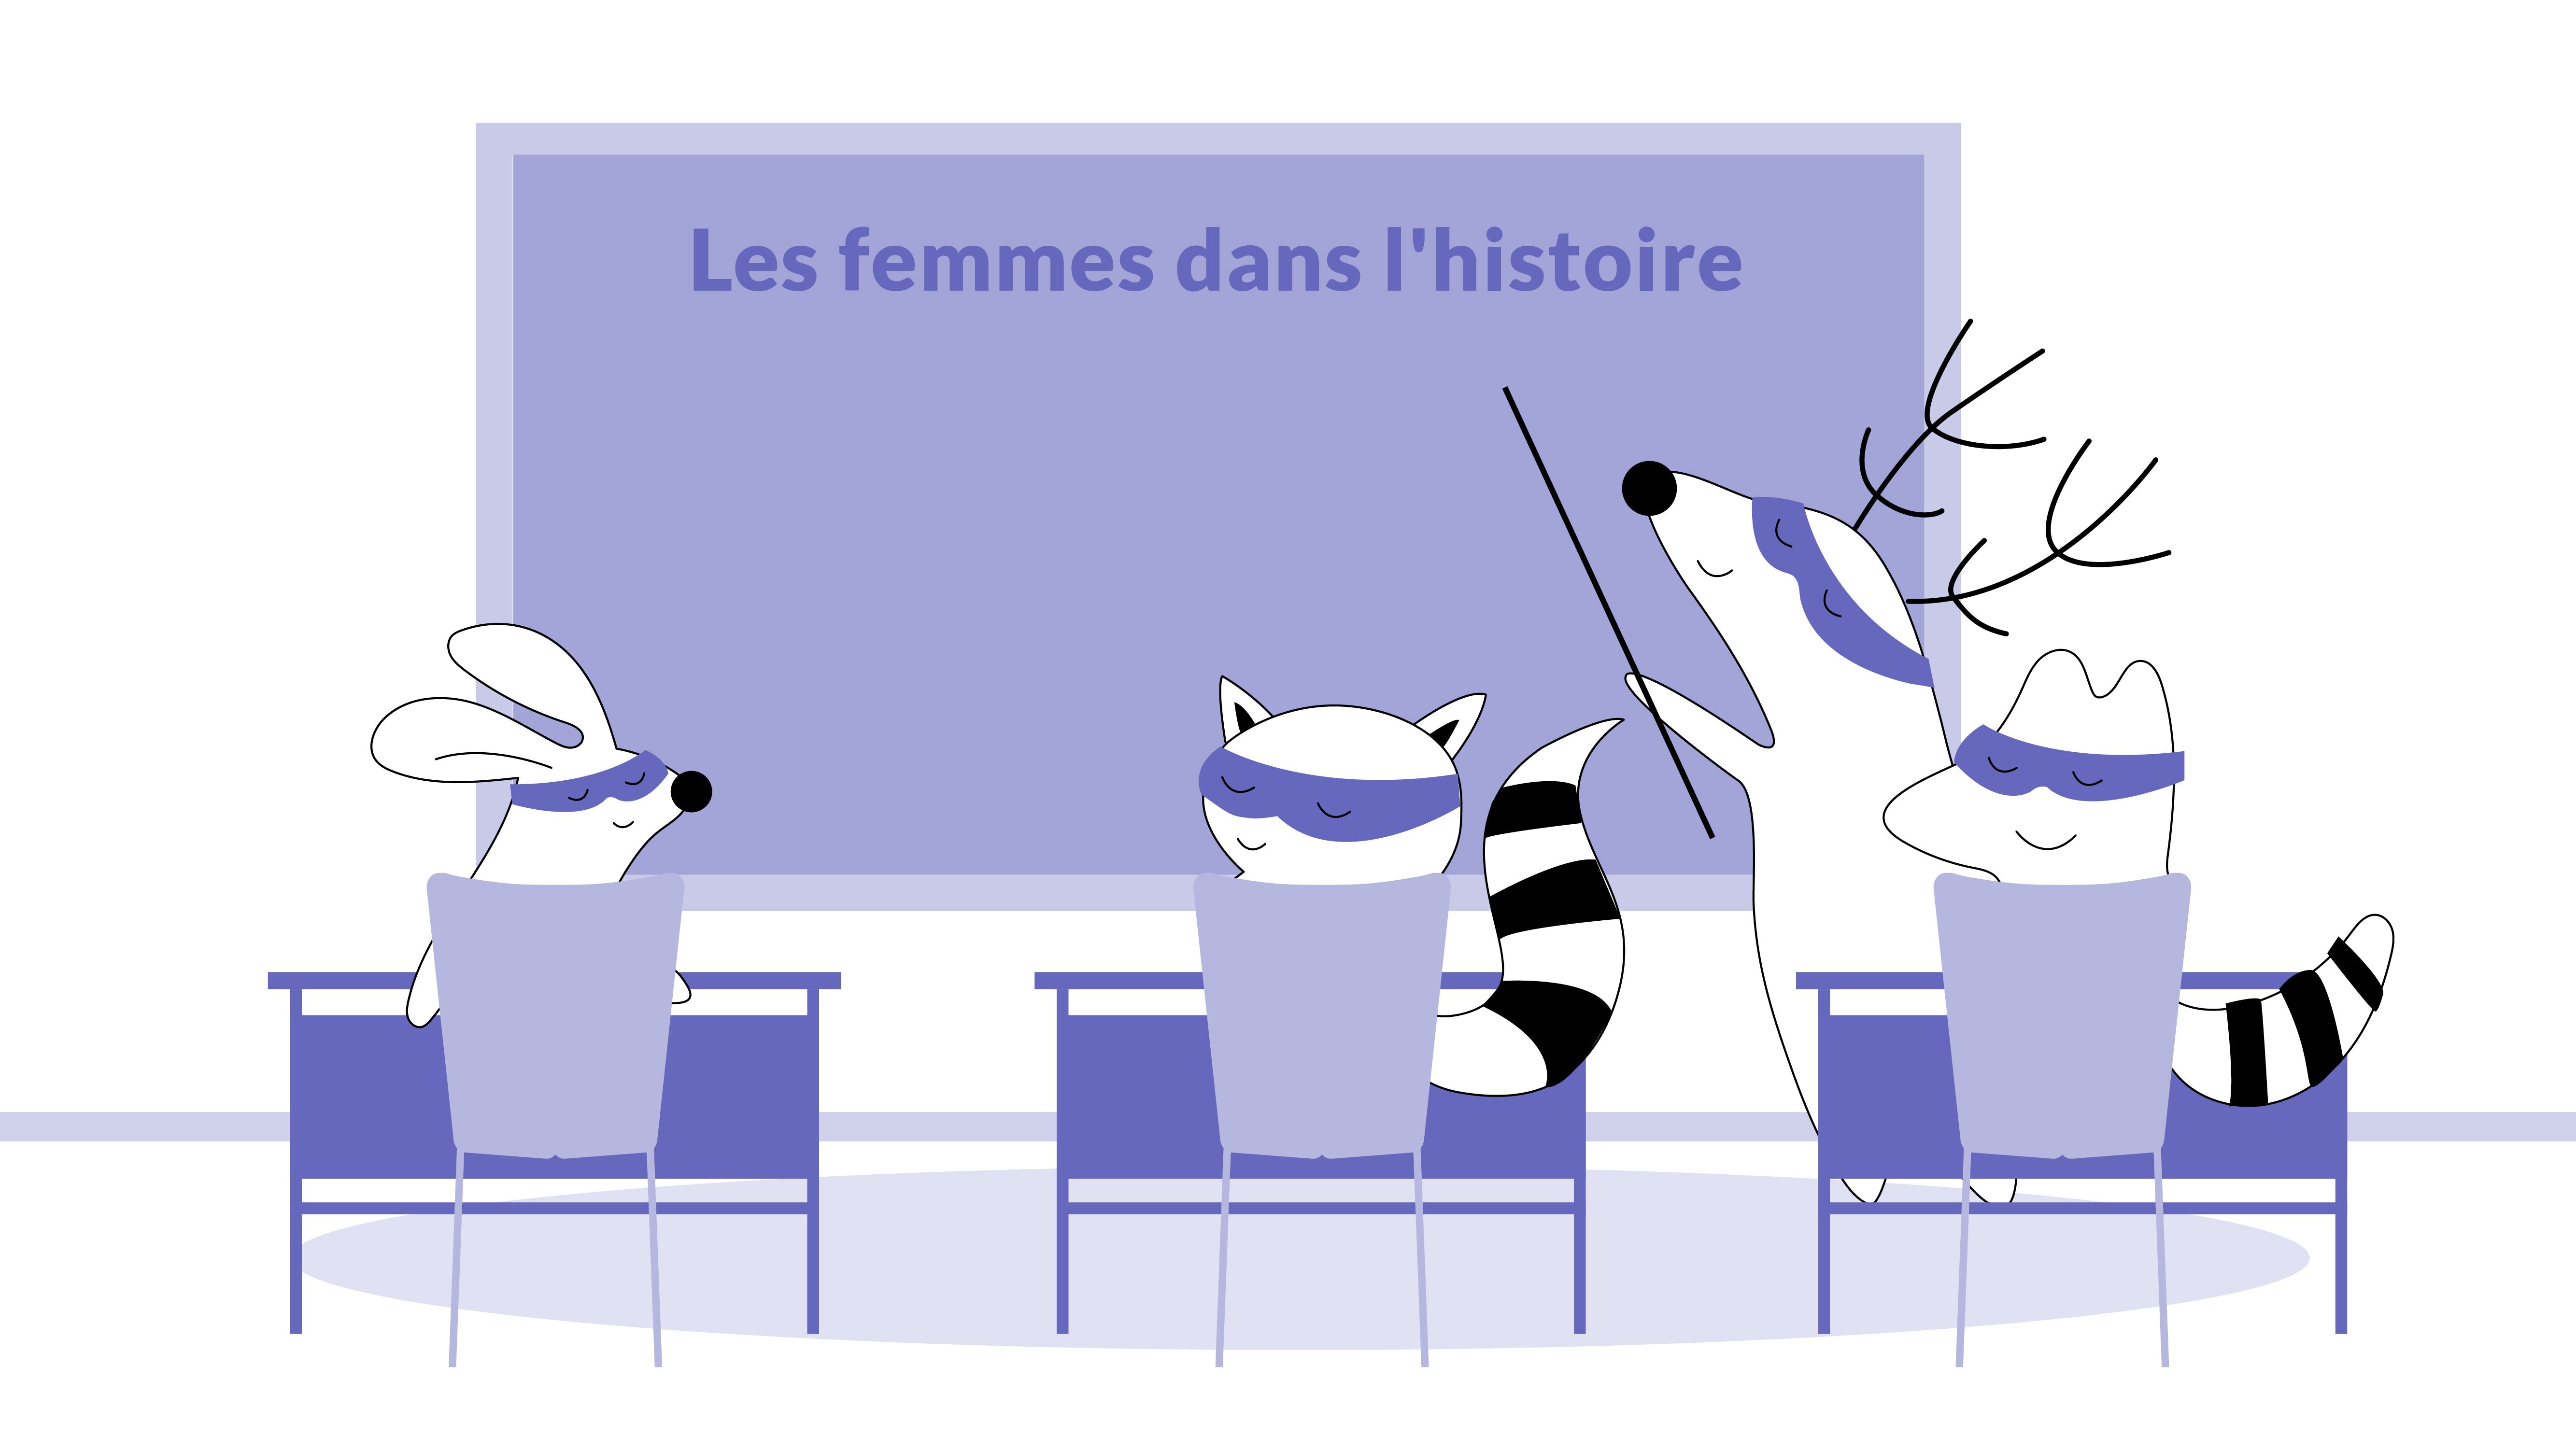 Benji in a French university, at a lesson called “Les femmes dans l'histoire”.